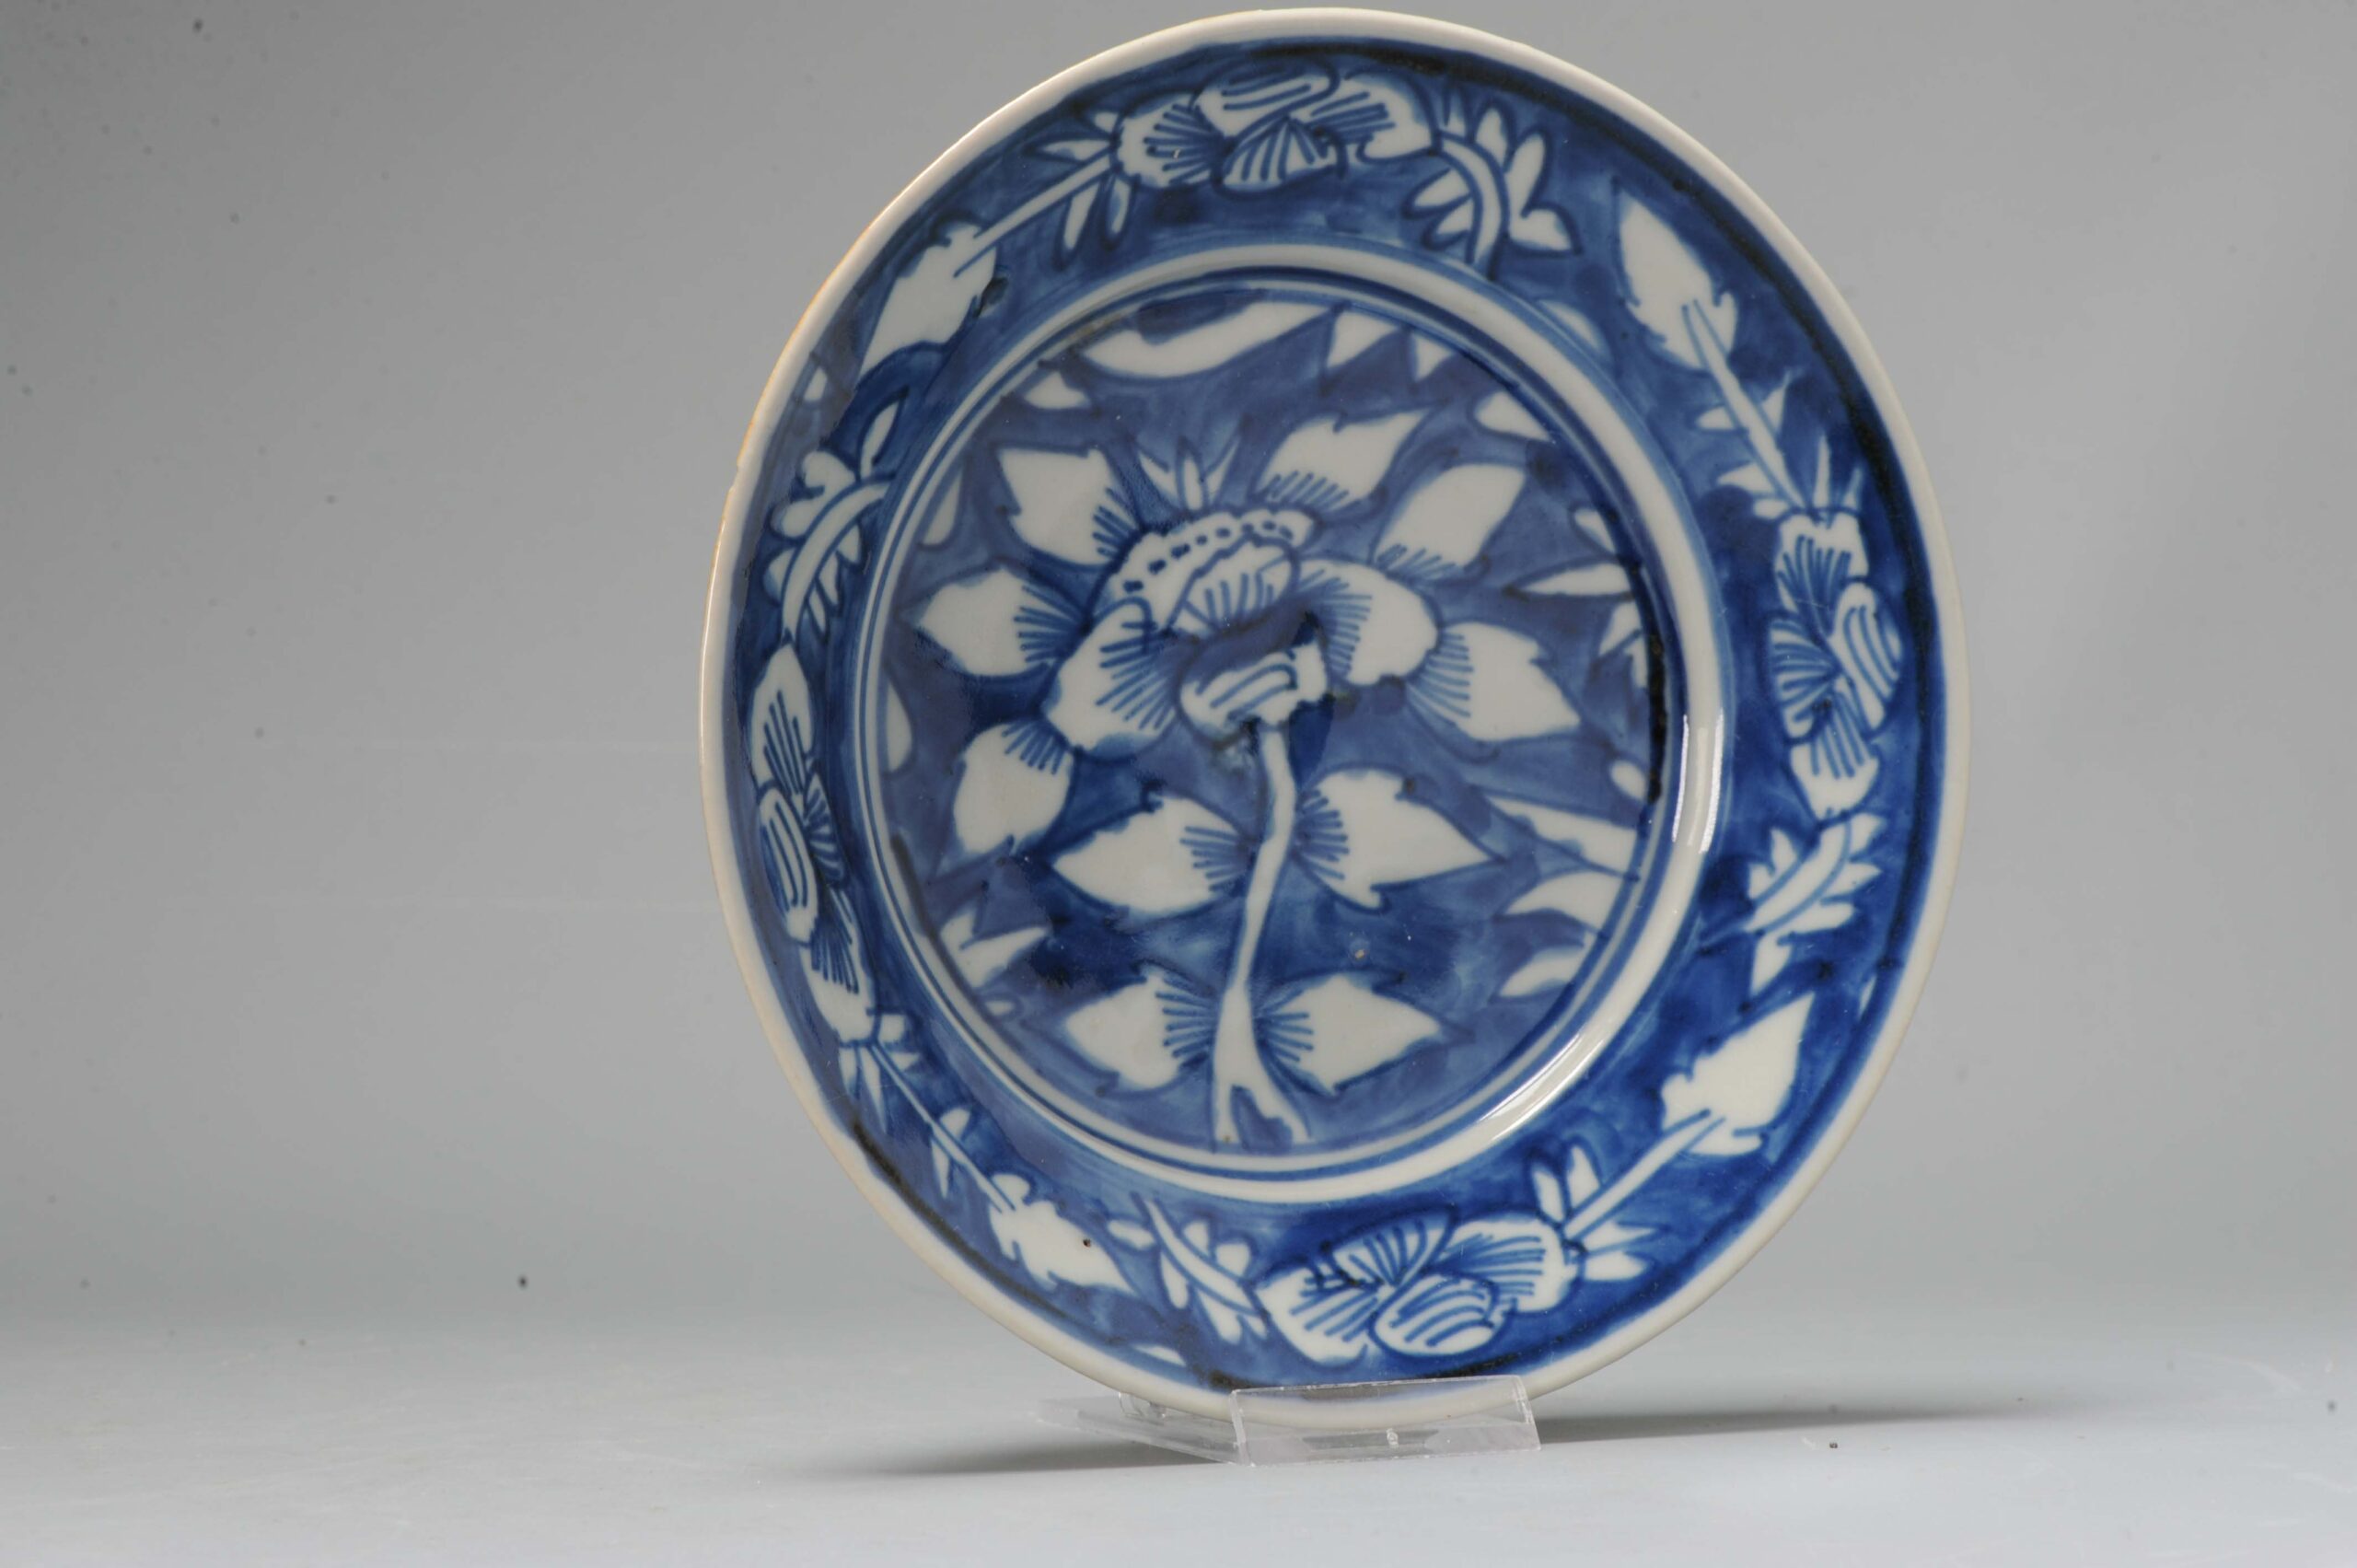 Unusual Ming Period Swatow Zhangzhou Dish with Reverse Decorated Flowers